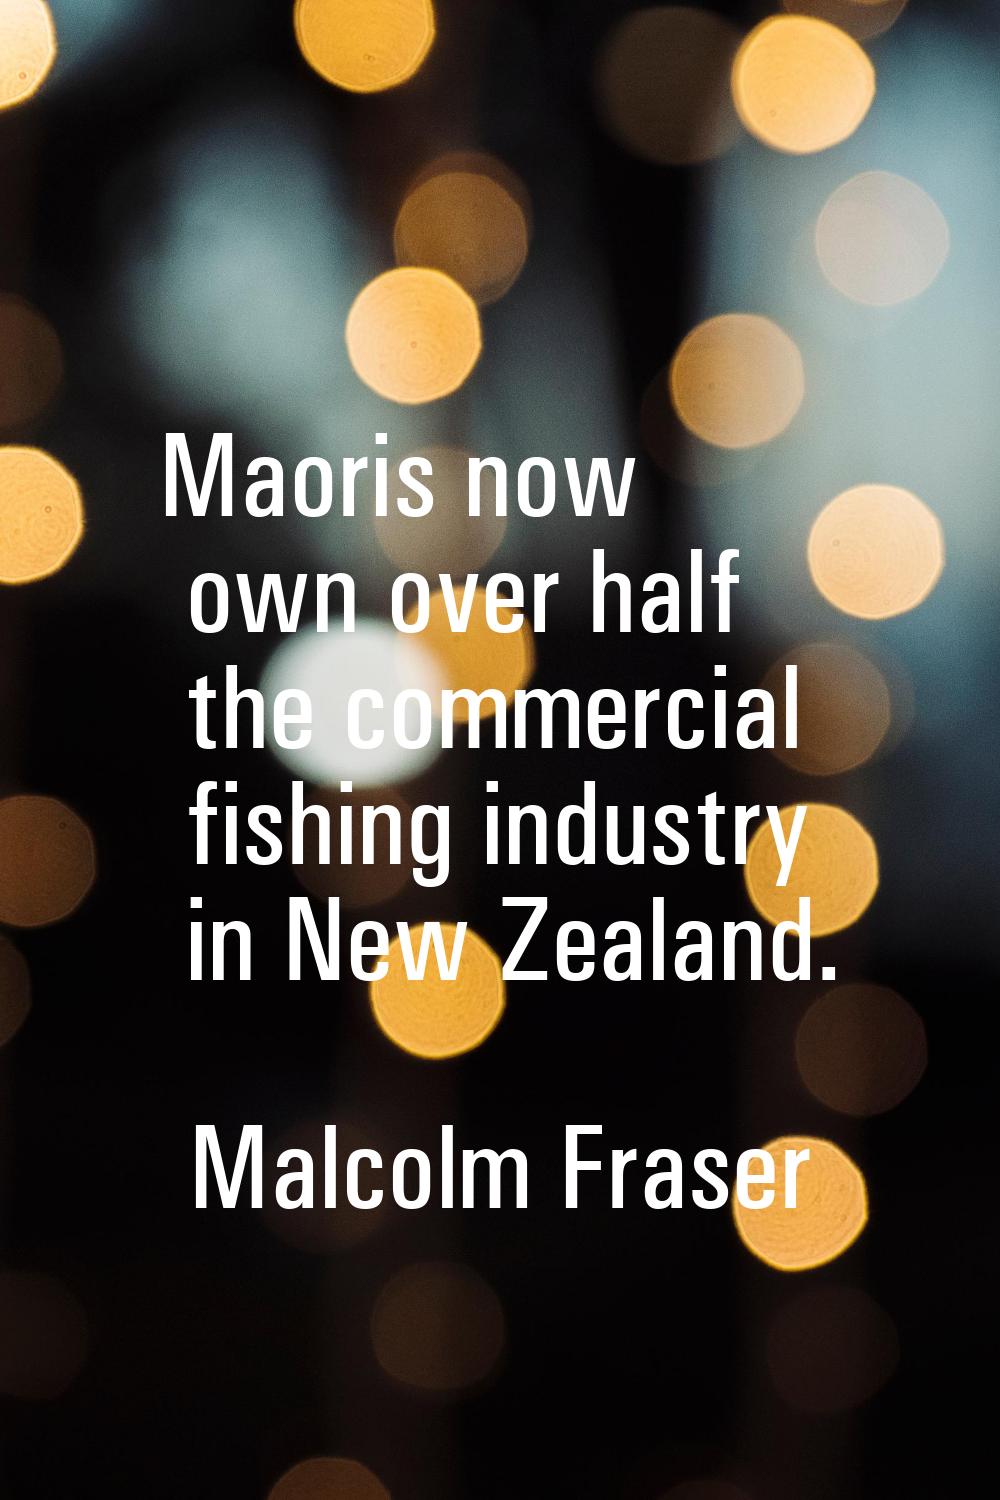 Maoris now own over half the commercial fishing industry in New Zealand.